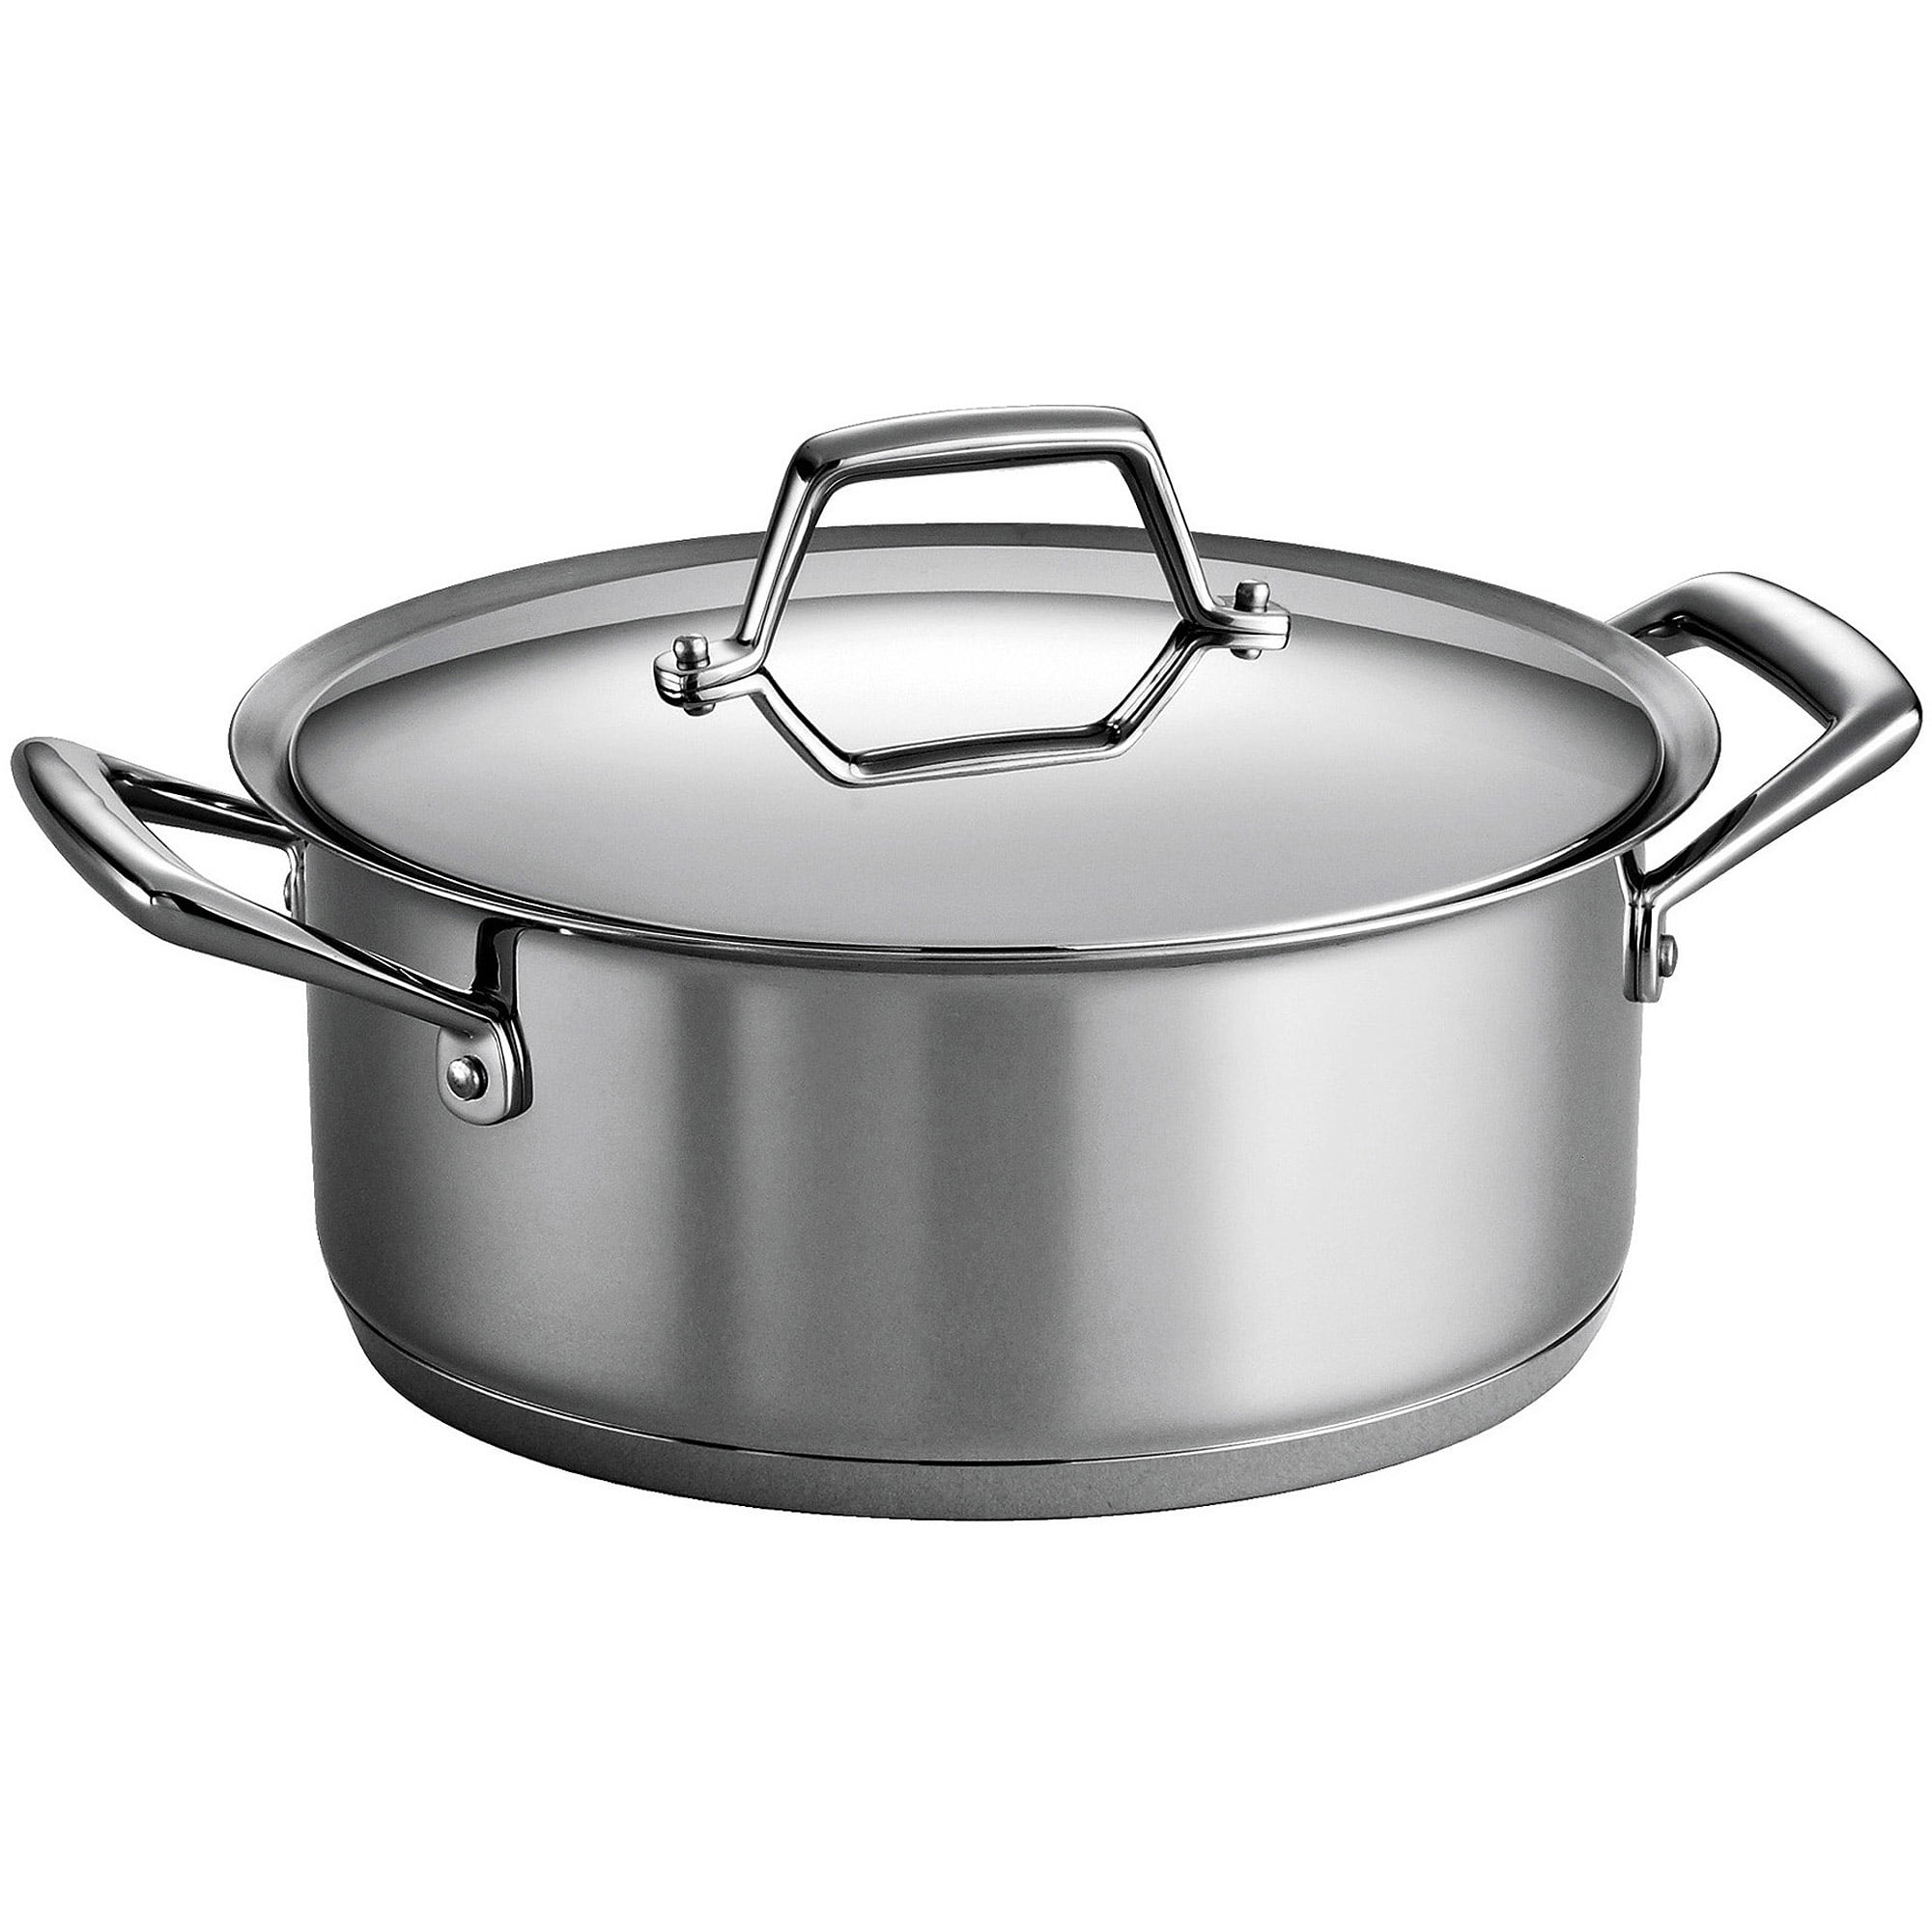 6 Quart Gourmet Stockpot with Cover